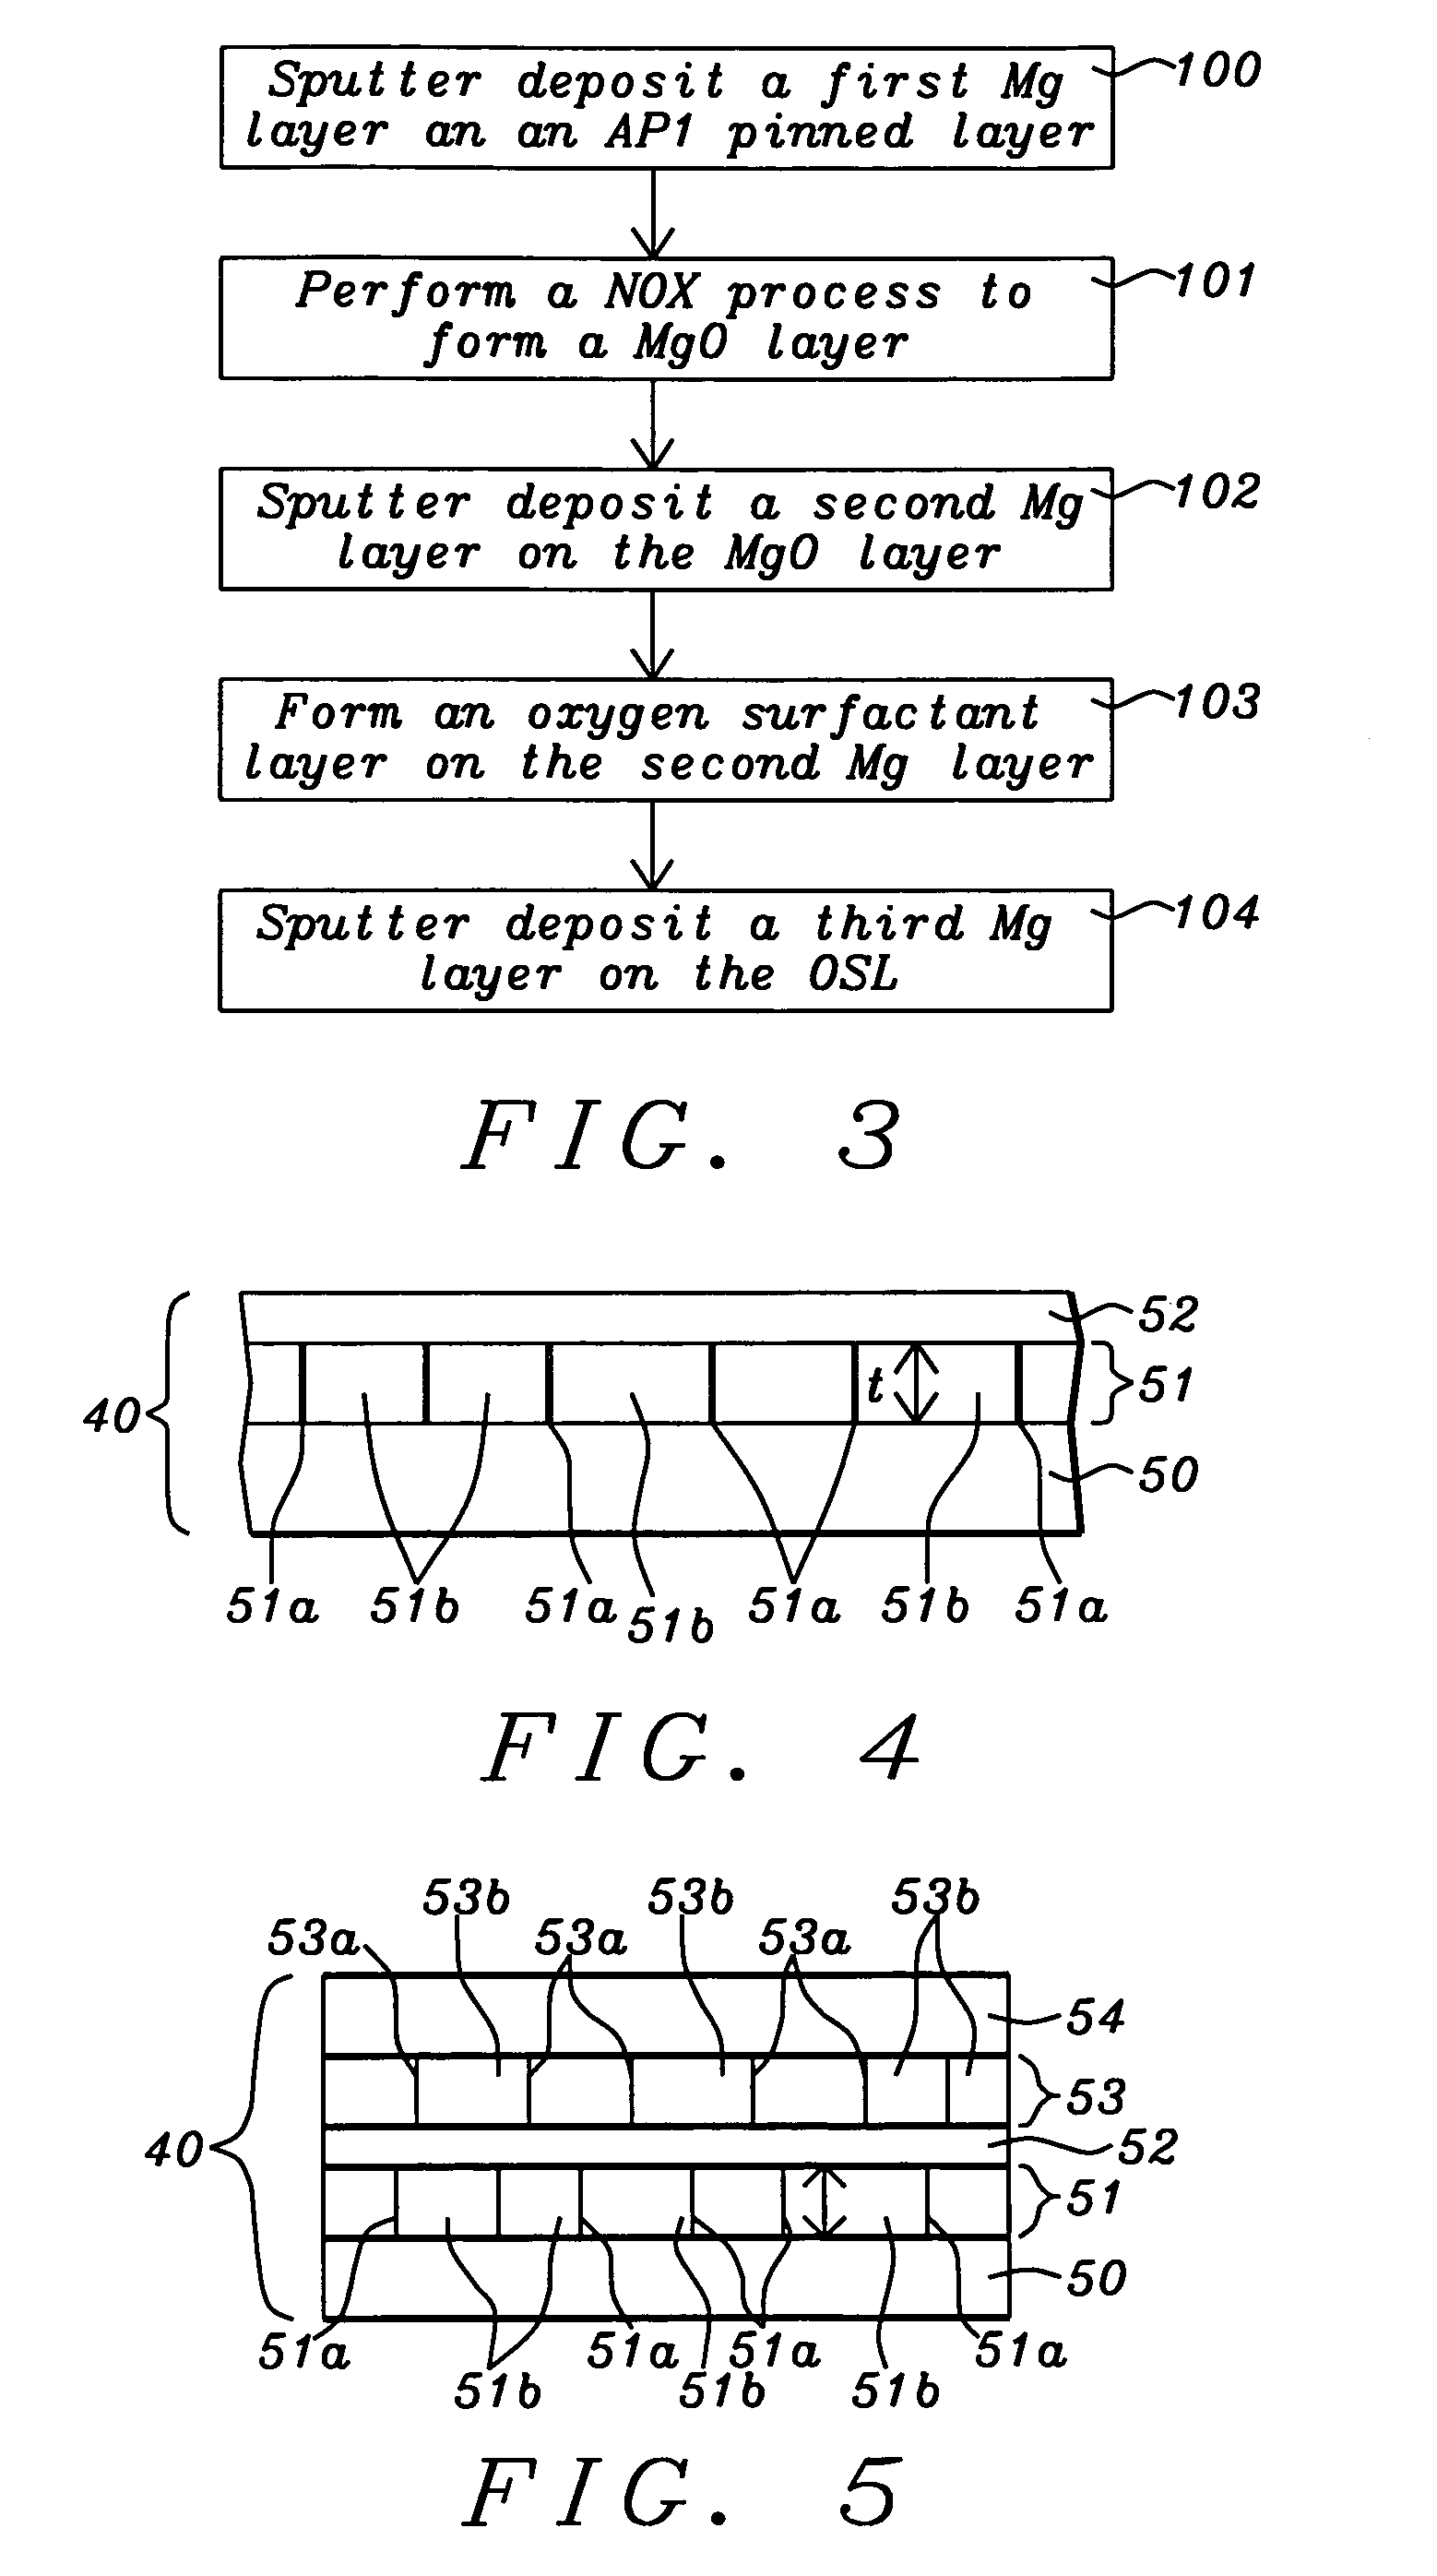 Structure and method to fabricate high performance MTJ devices for spin-transfer torque (STT)-RAM application